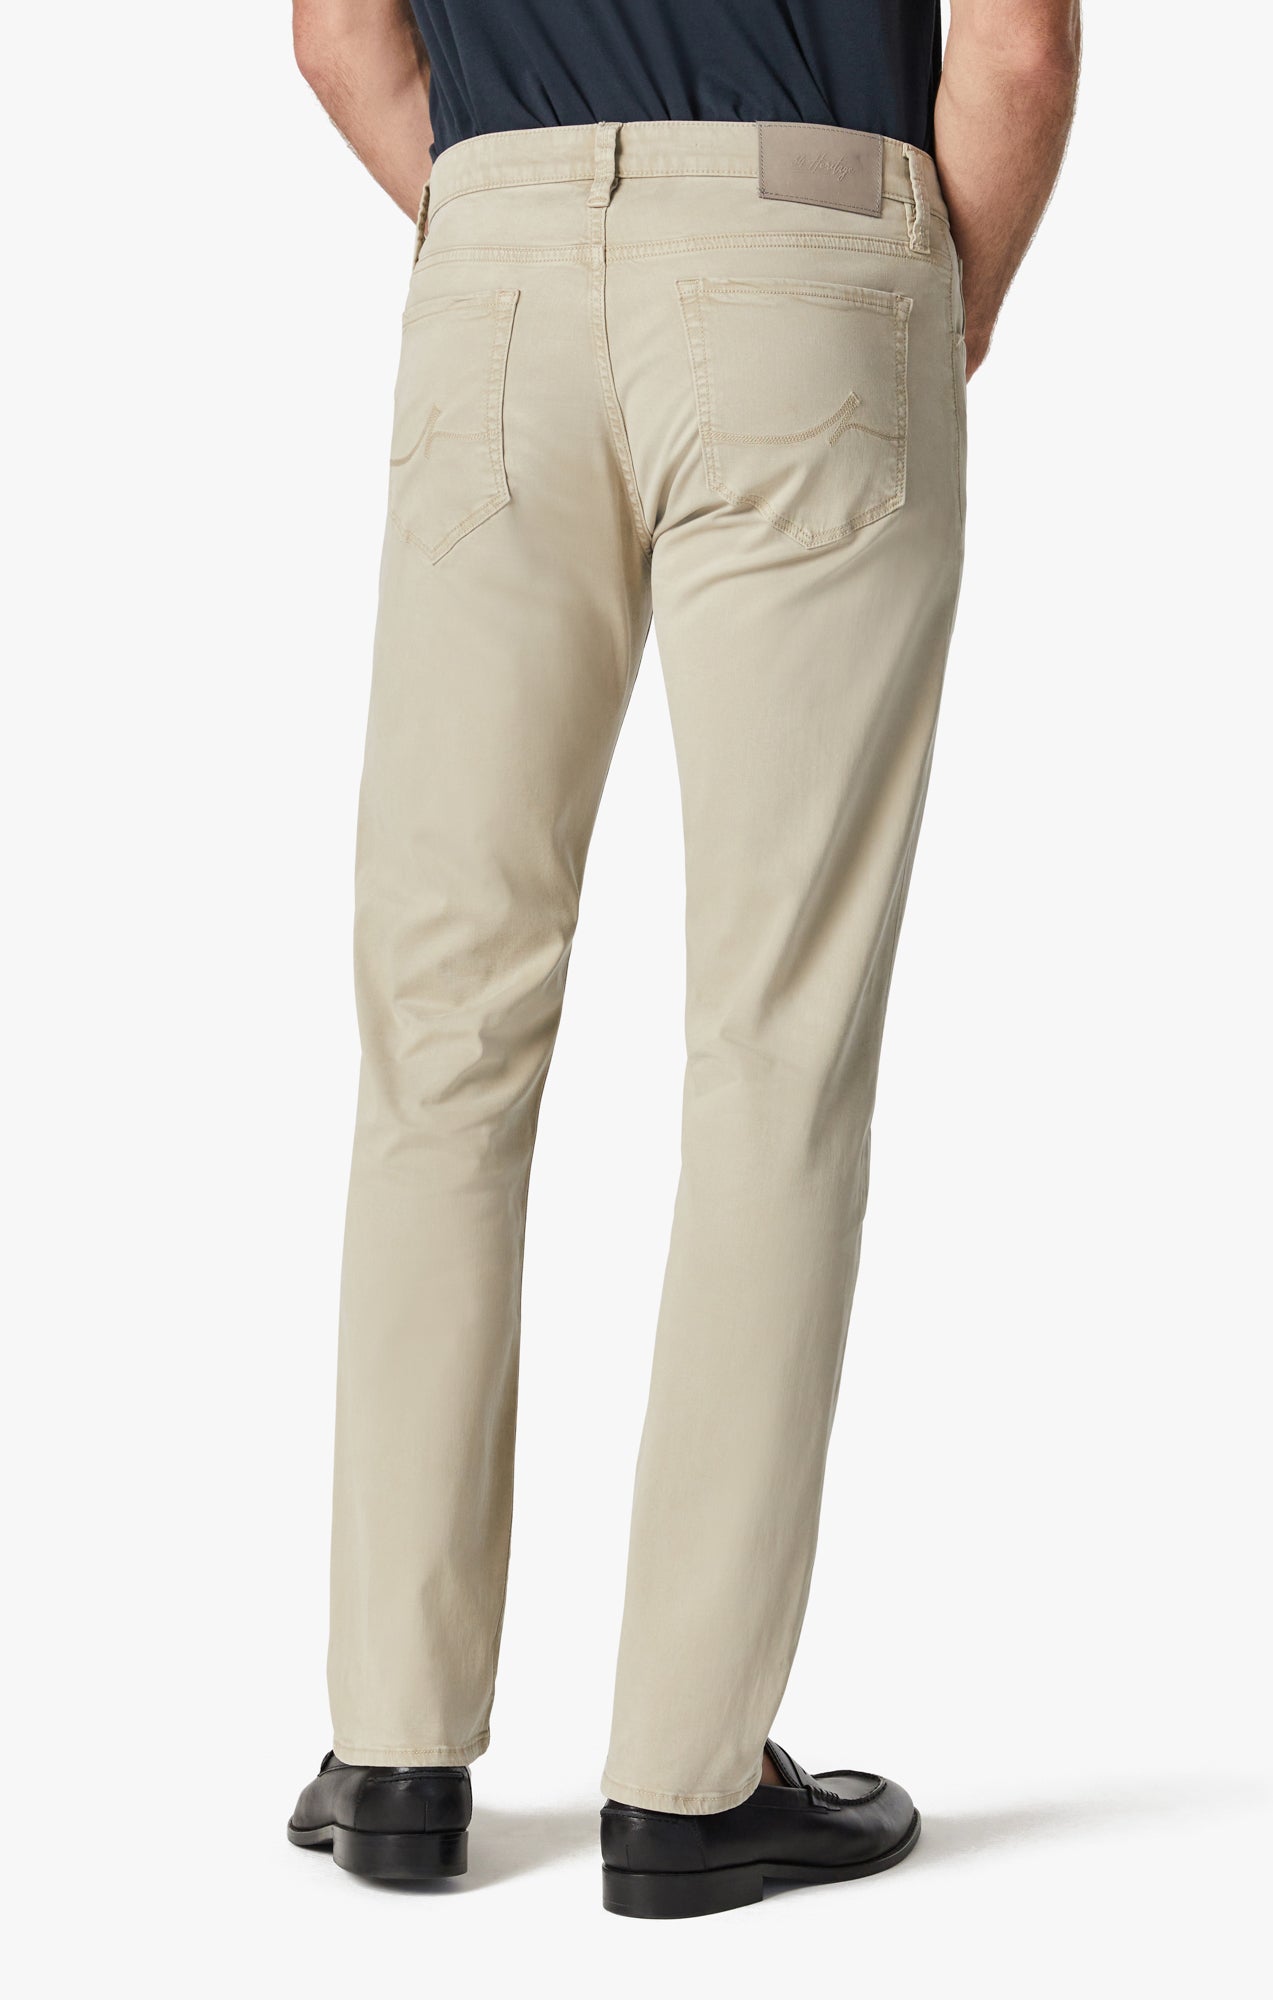 Courage Straight Leg Pants In Aluminum Twill Image 5